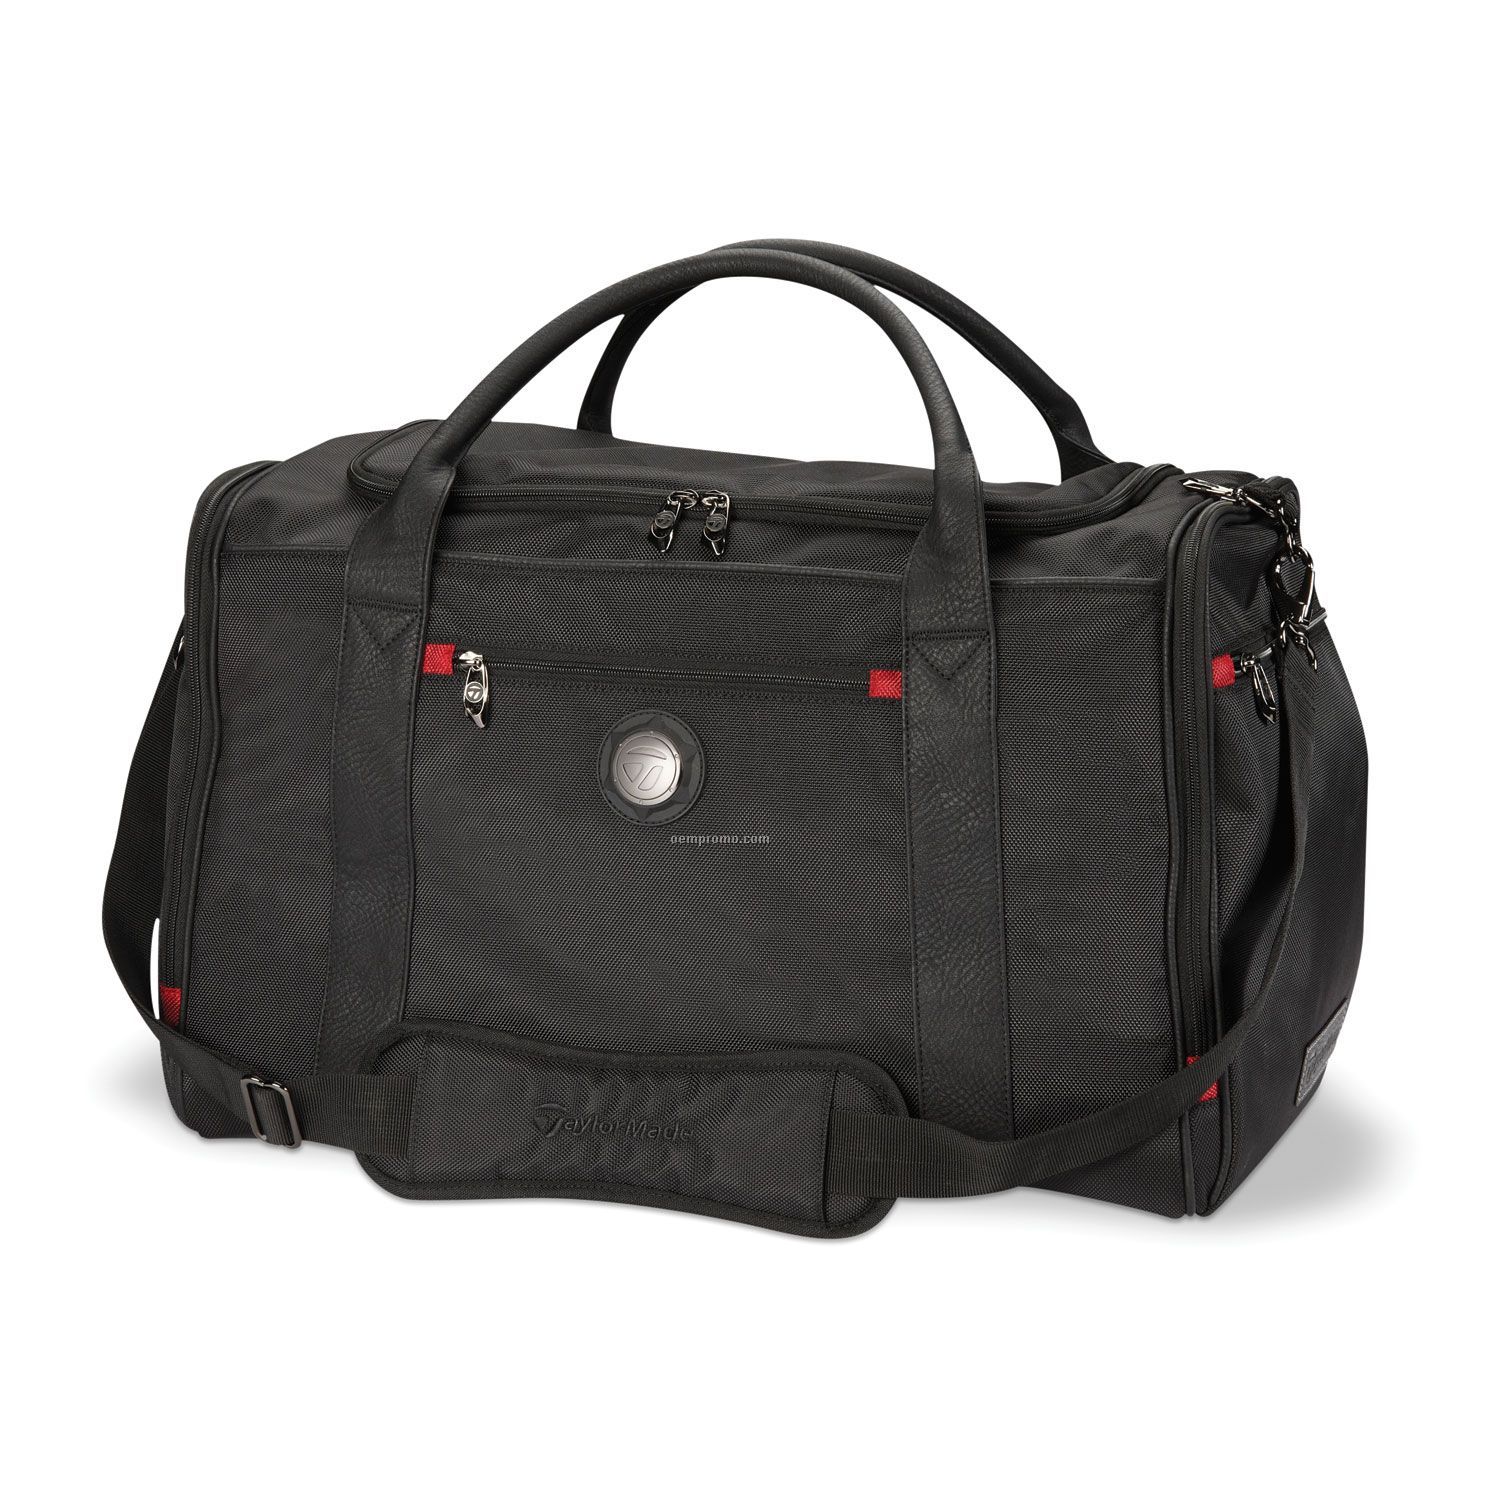 Players Medium Duffle Bag (2011) - Embroidered